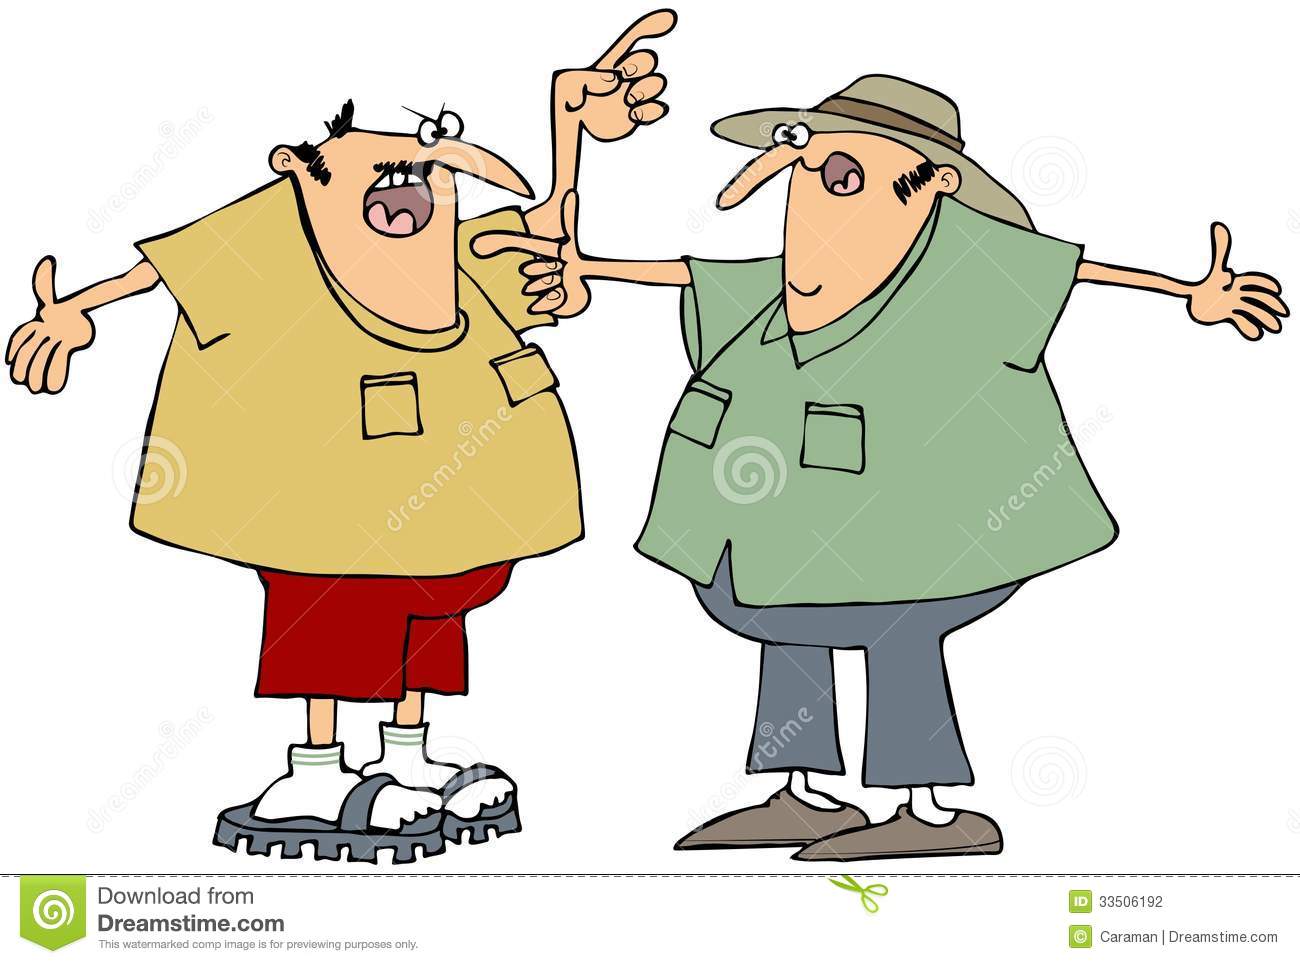 This Illustration Depicts Two Men Having A Heated Argument